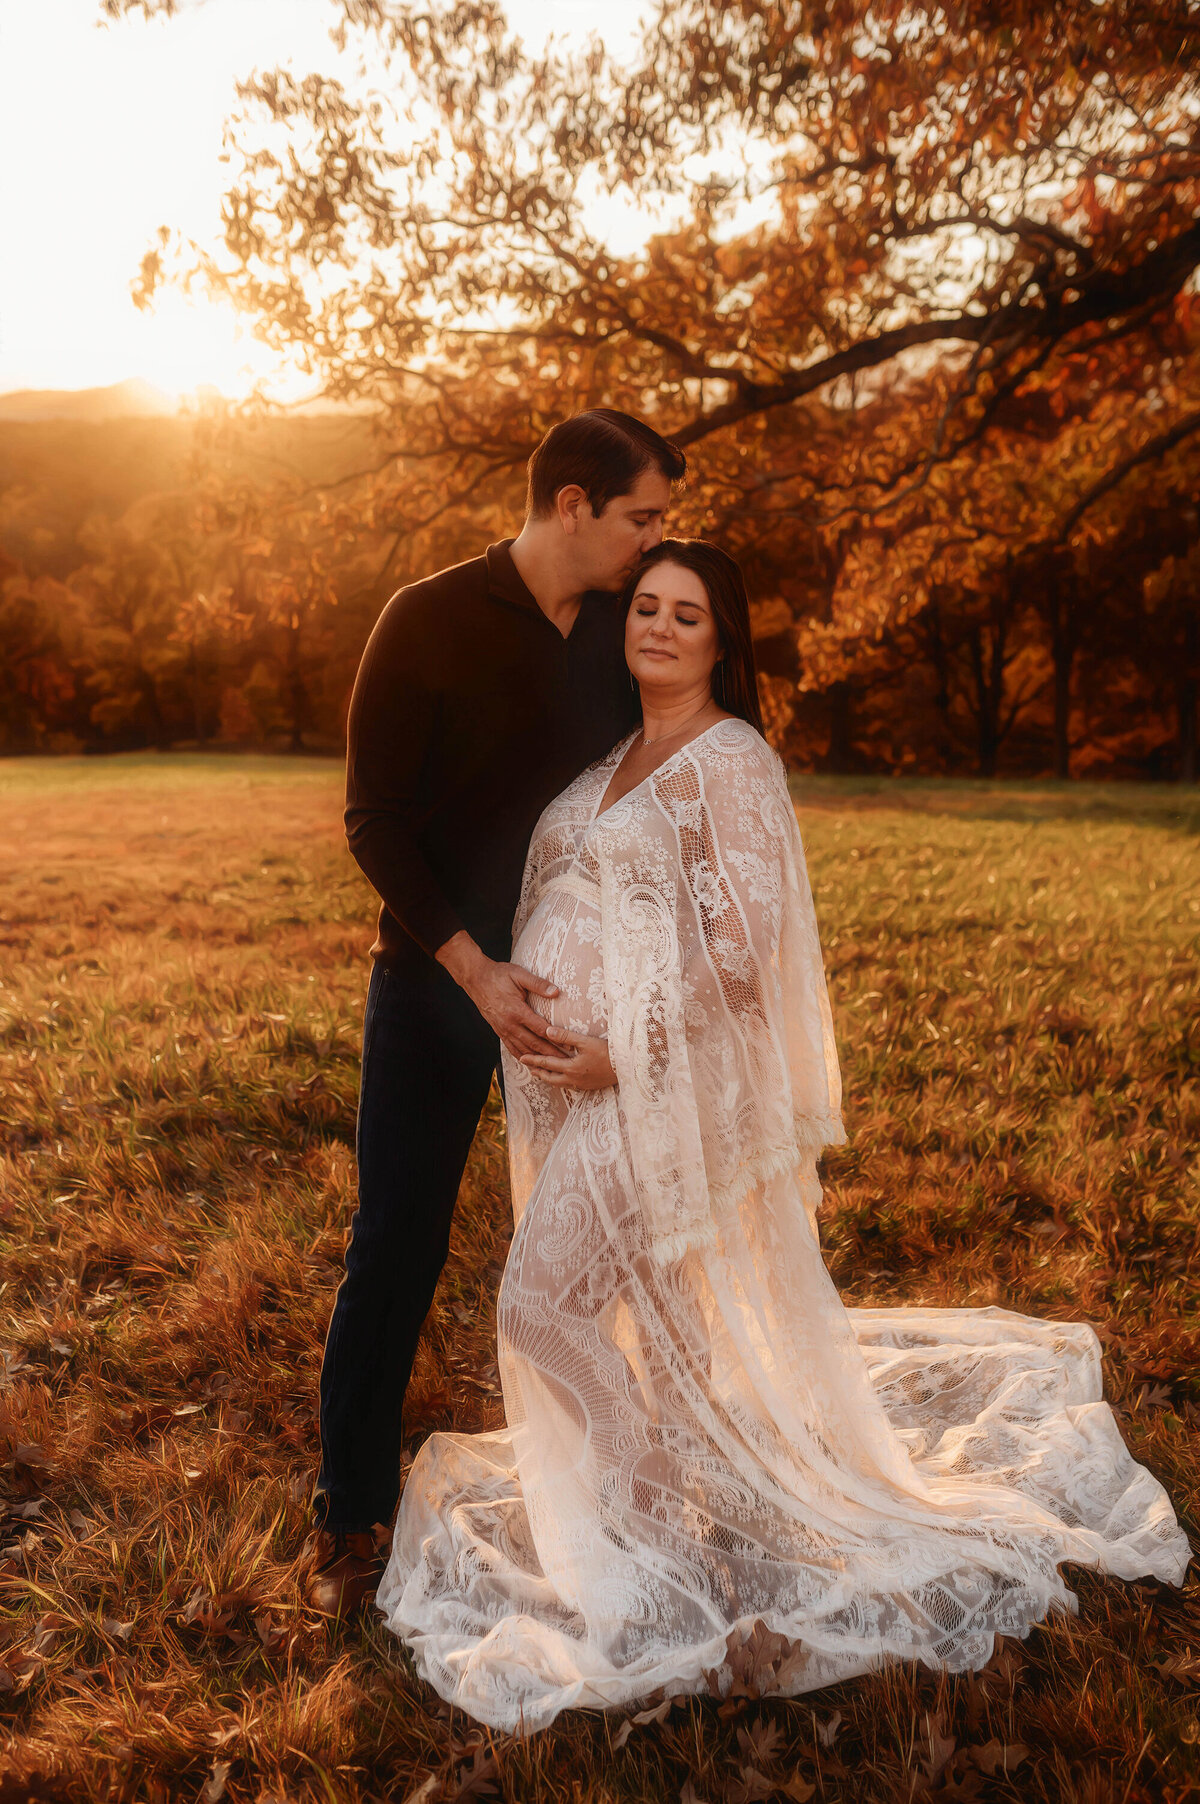 Expectant parents pose for portraits during their babymoon in Asheville, NC.